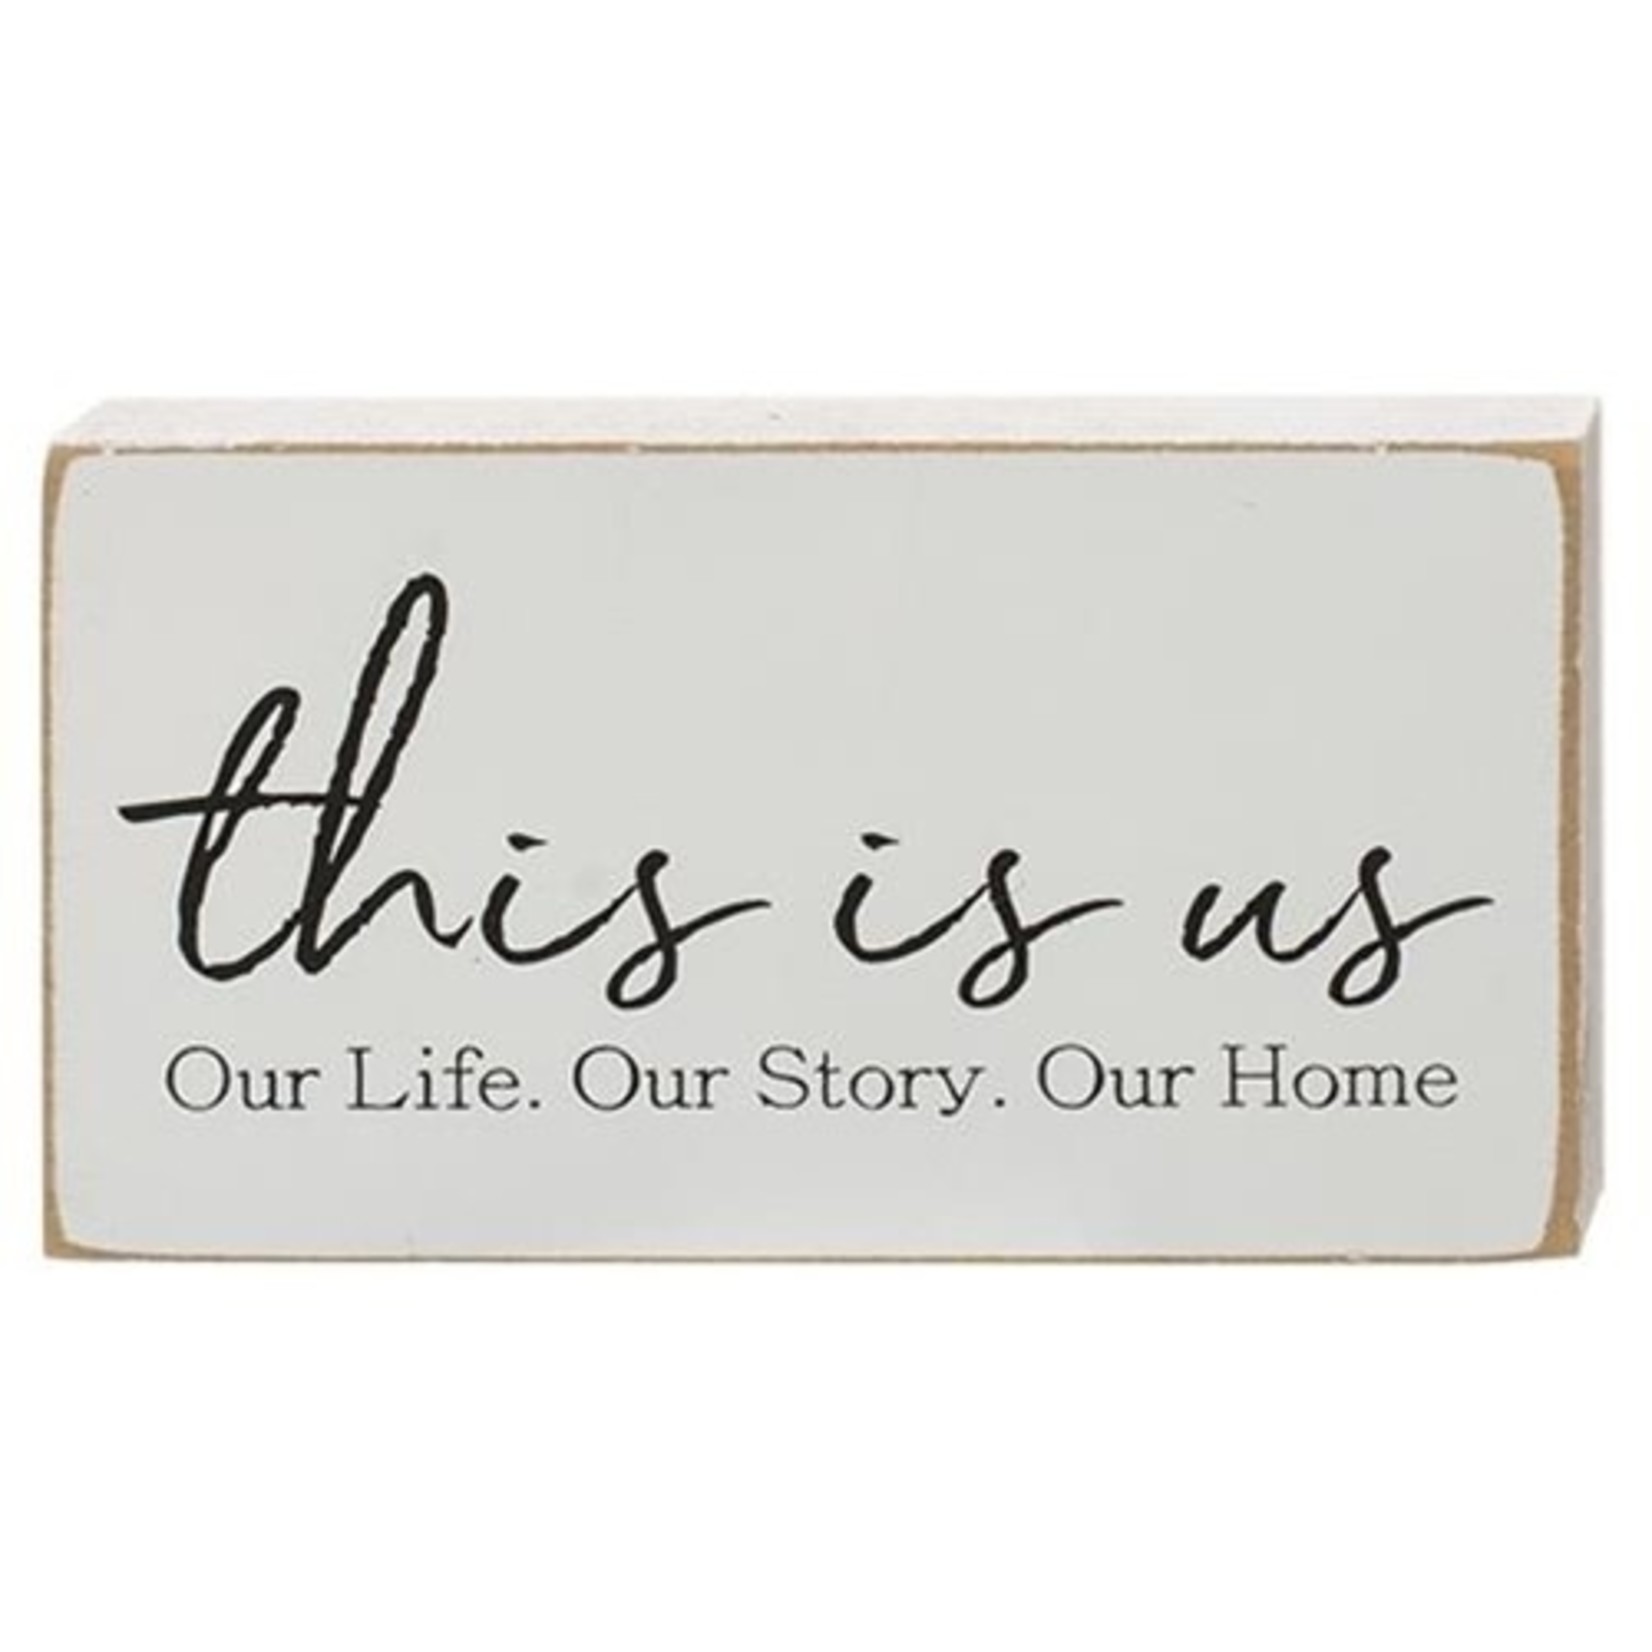 Thi is us-Our Life. Our Story. Our Home - Plaque